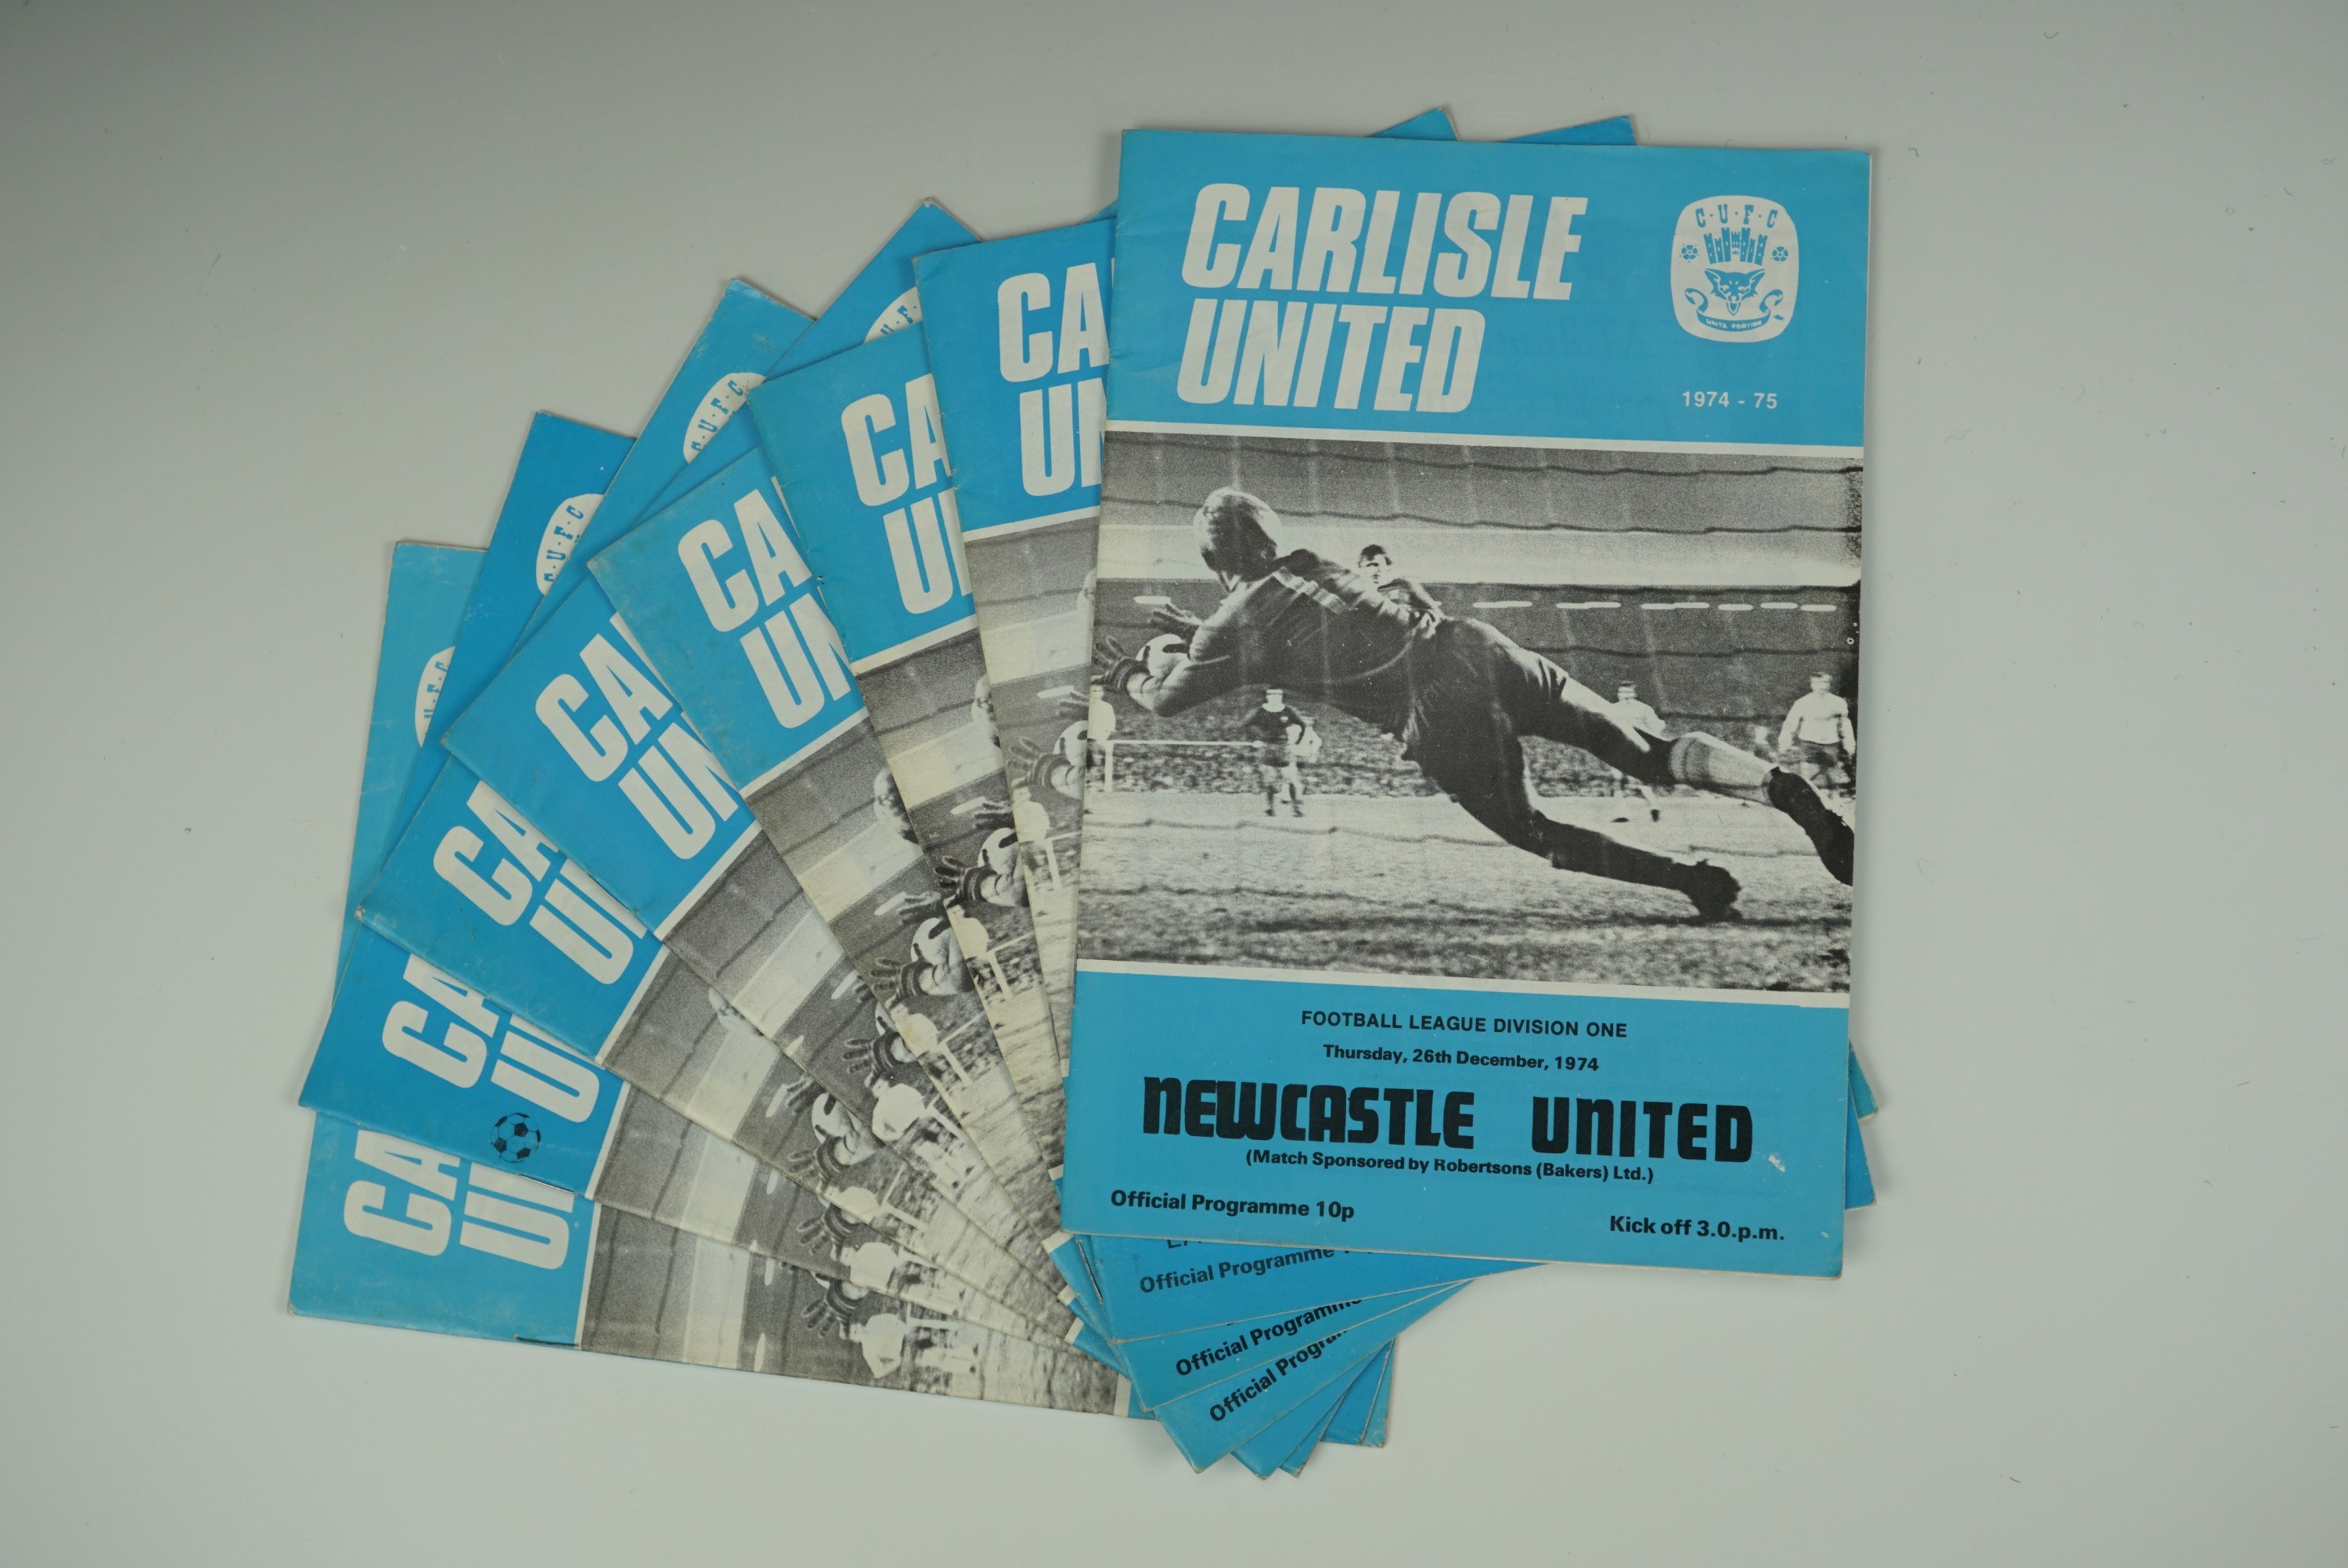 A quantity of Carlisle United programmes including eight football league division one 1974-1975 home